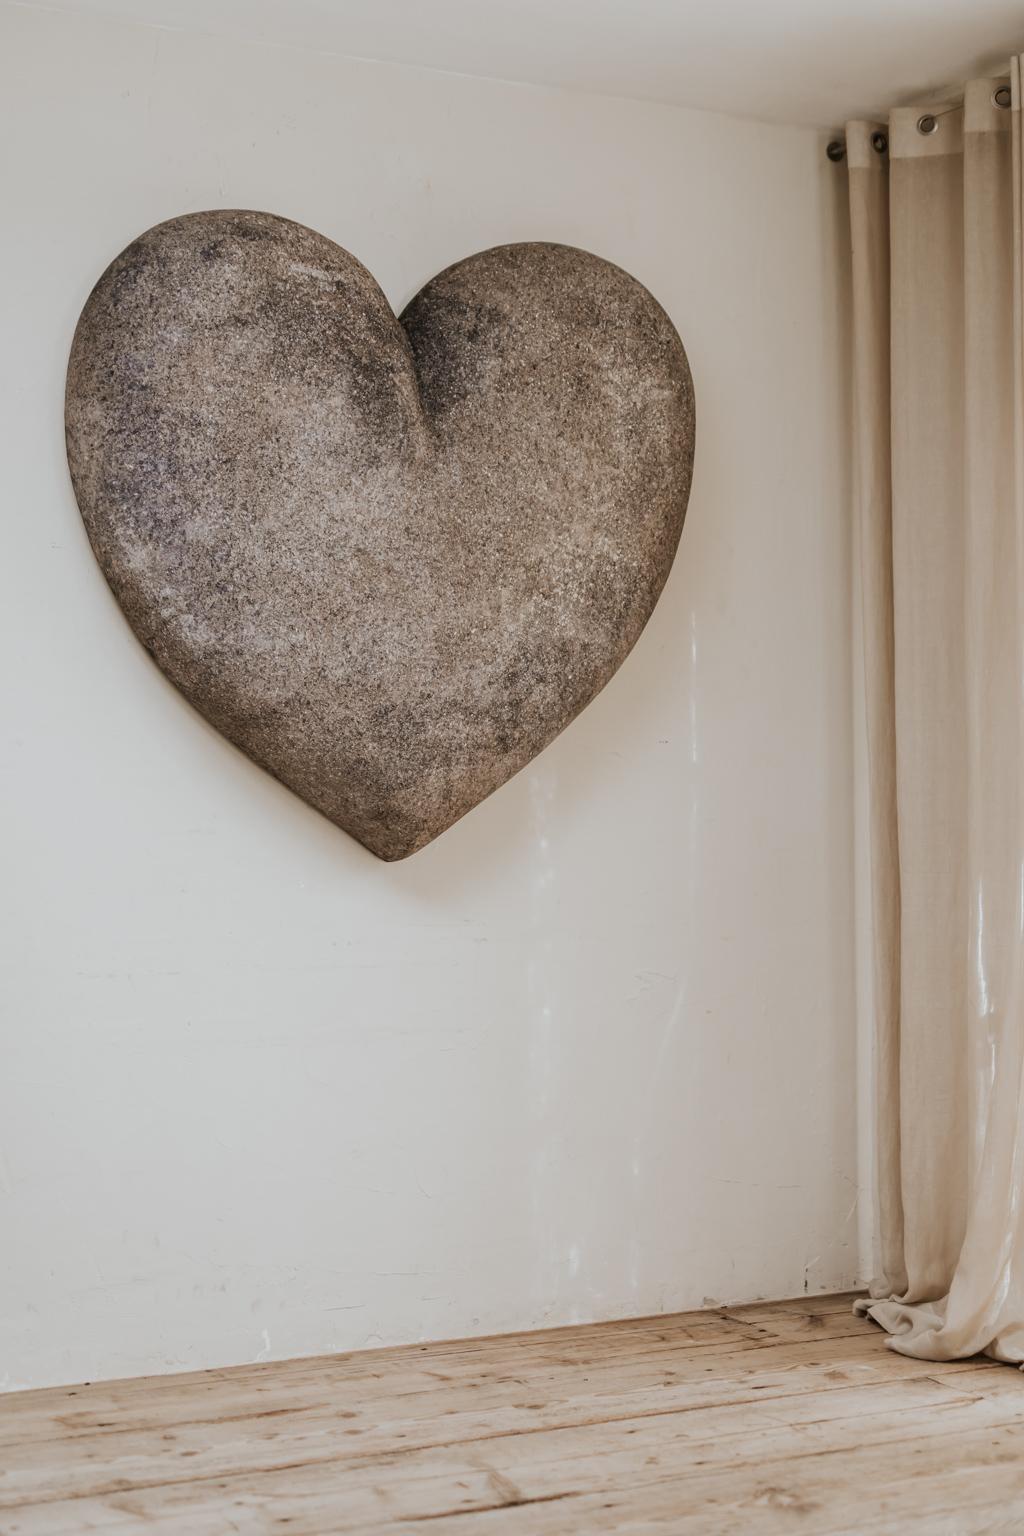 Contemporary Fausse Pierre/Imitation Stone Heart